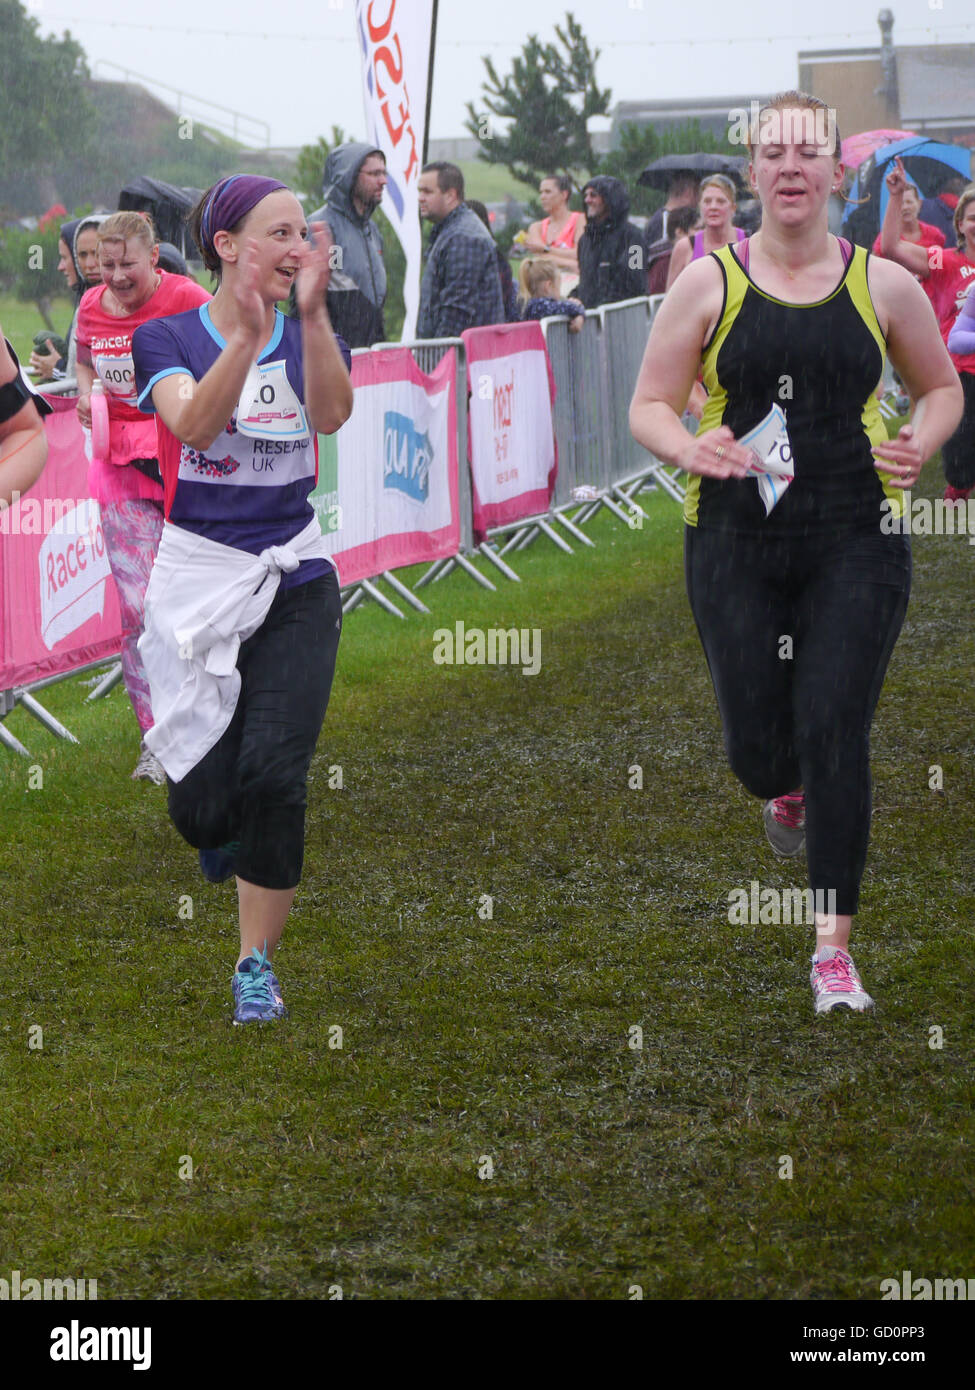 Portsmouth, Hampshire, UK. 10 July 2016. A Runner enourages her friend across the finish line at the end of the Race for life. The Race for life is a charity event in which females complete a 10Km or 5Km run in aid of cancer research. Credit:  simon evans/Alamy Live News Stock Photo